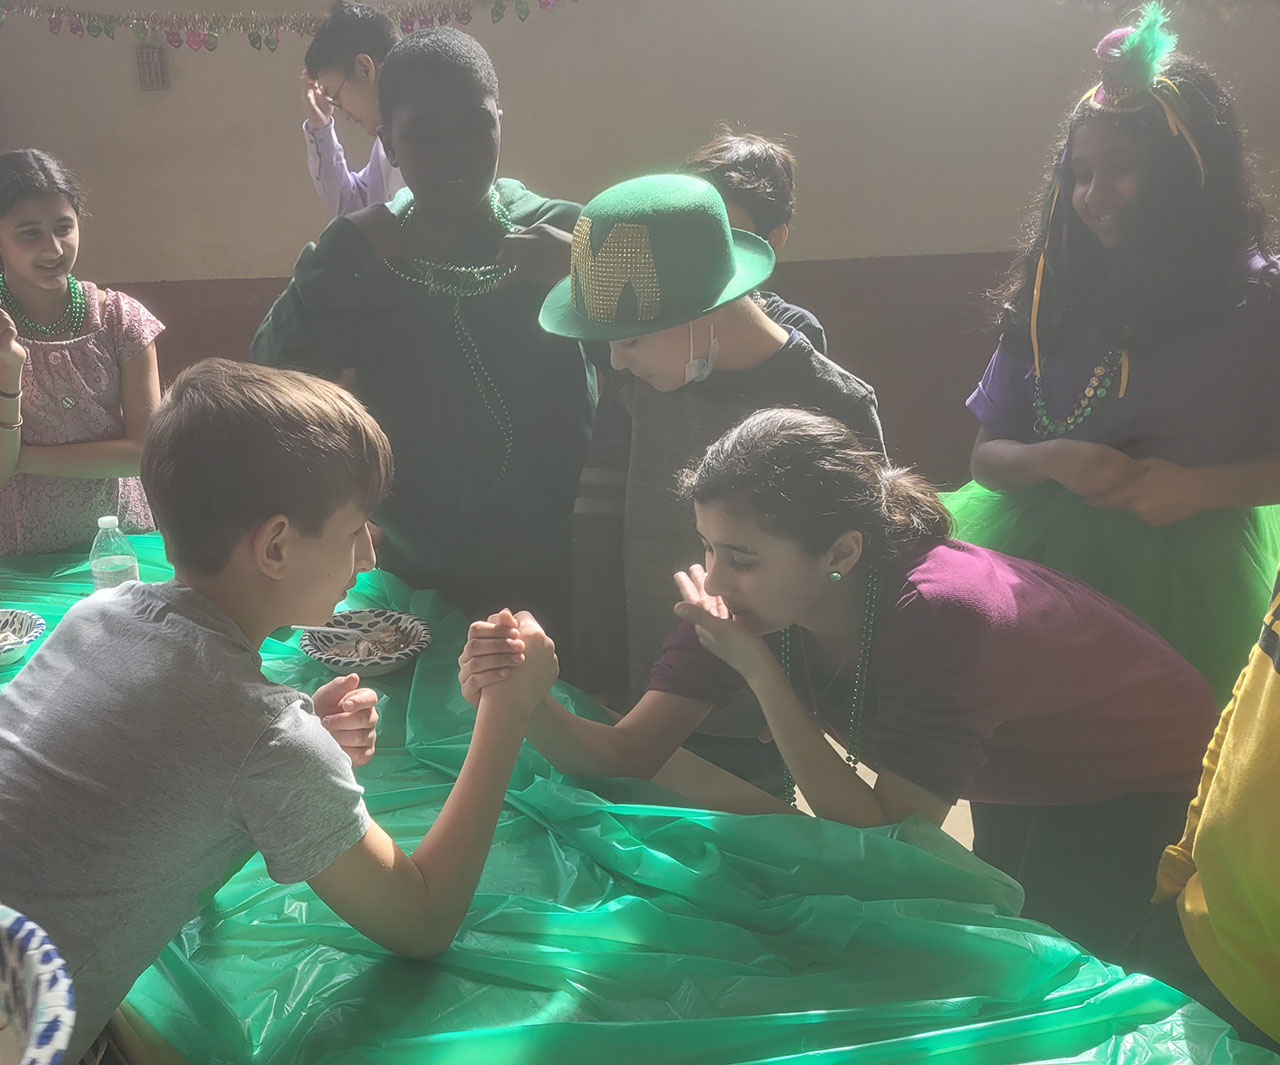 SciCore Academy's Mardi Gras Party of 2022